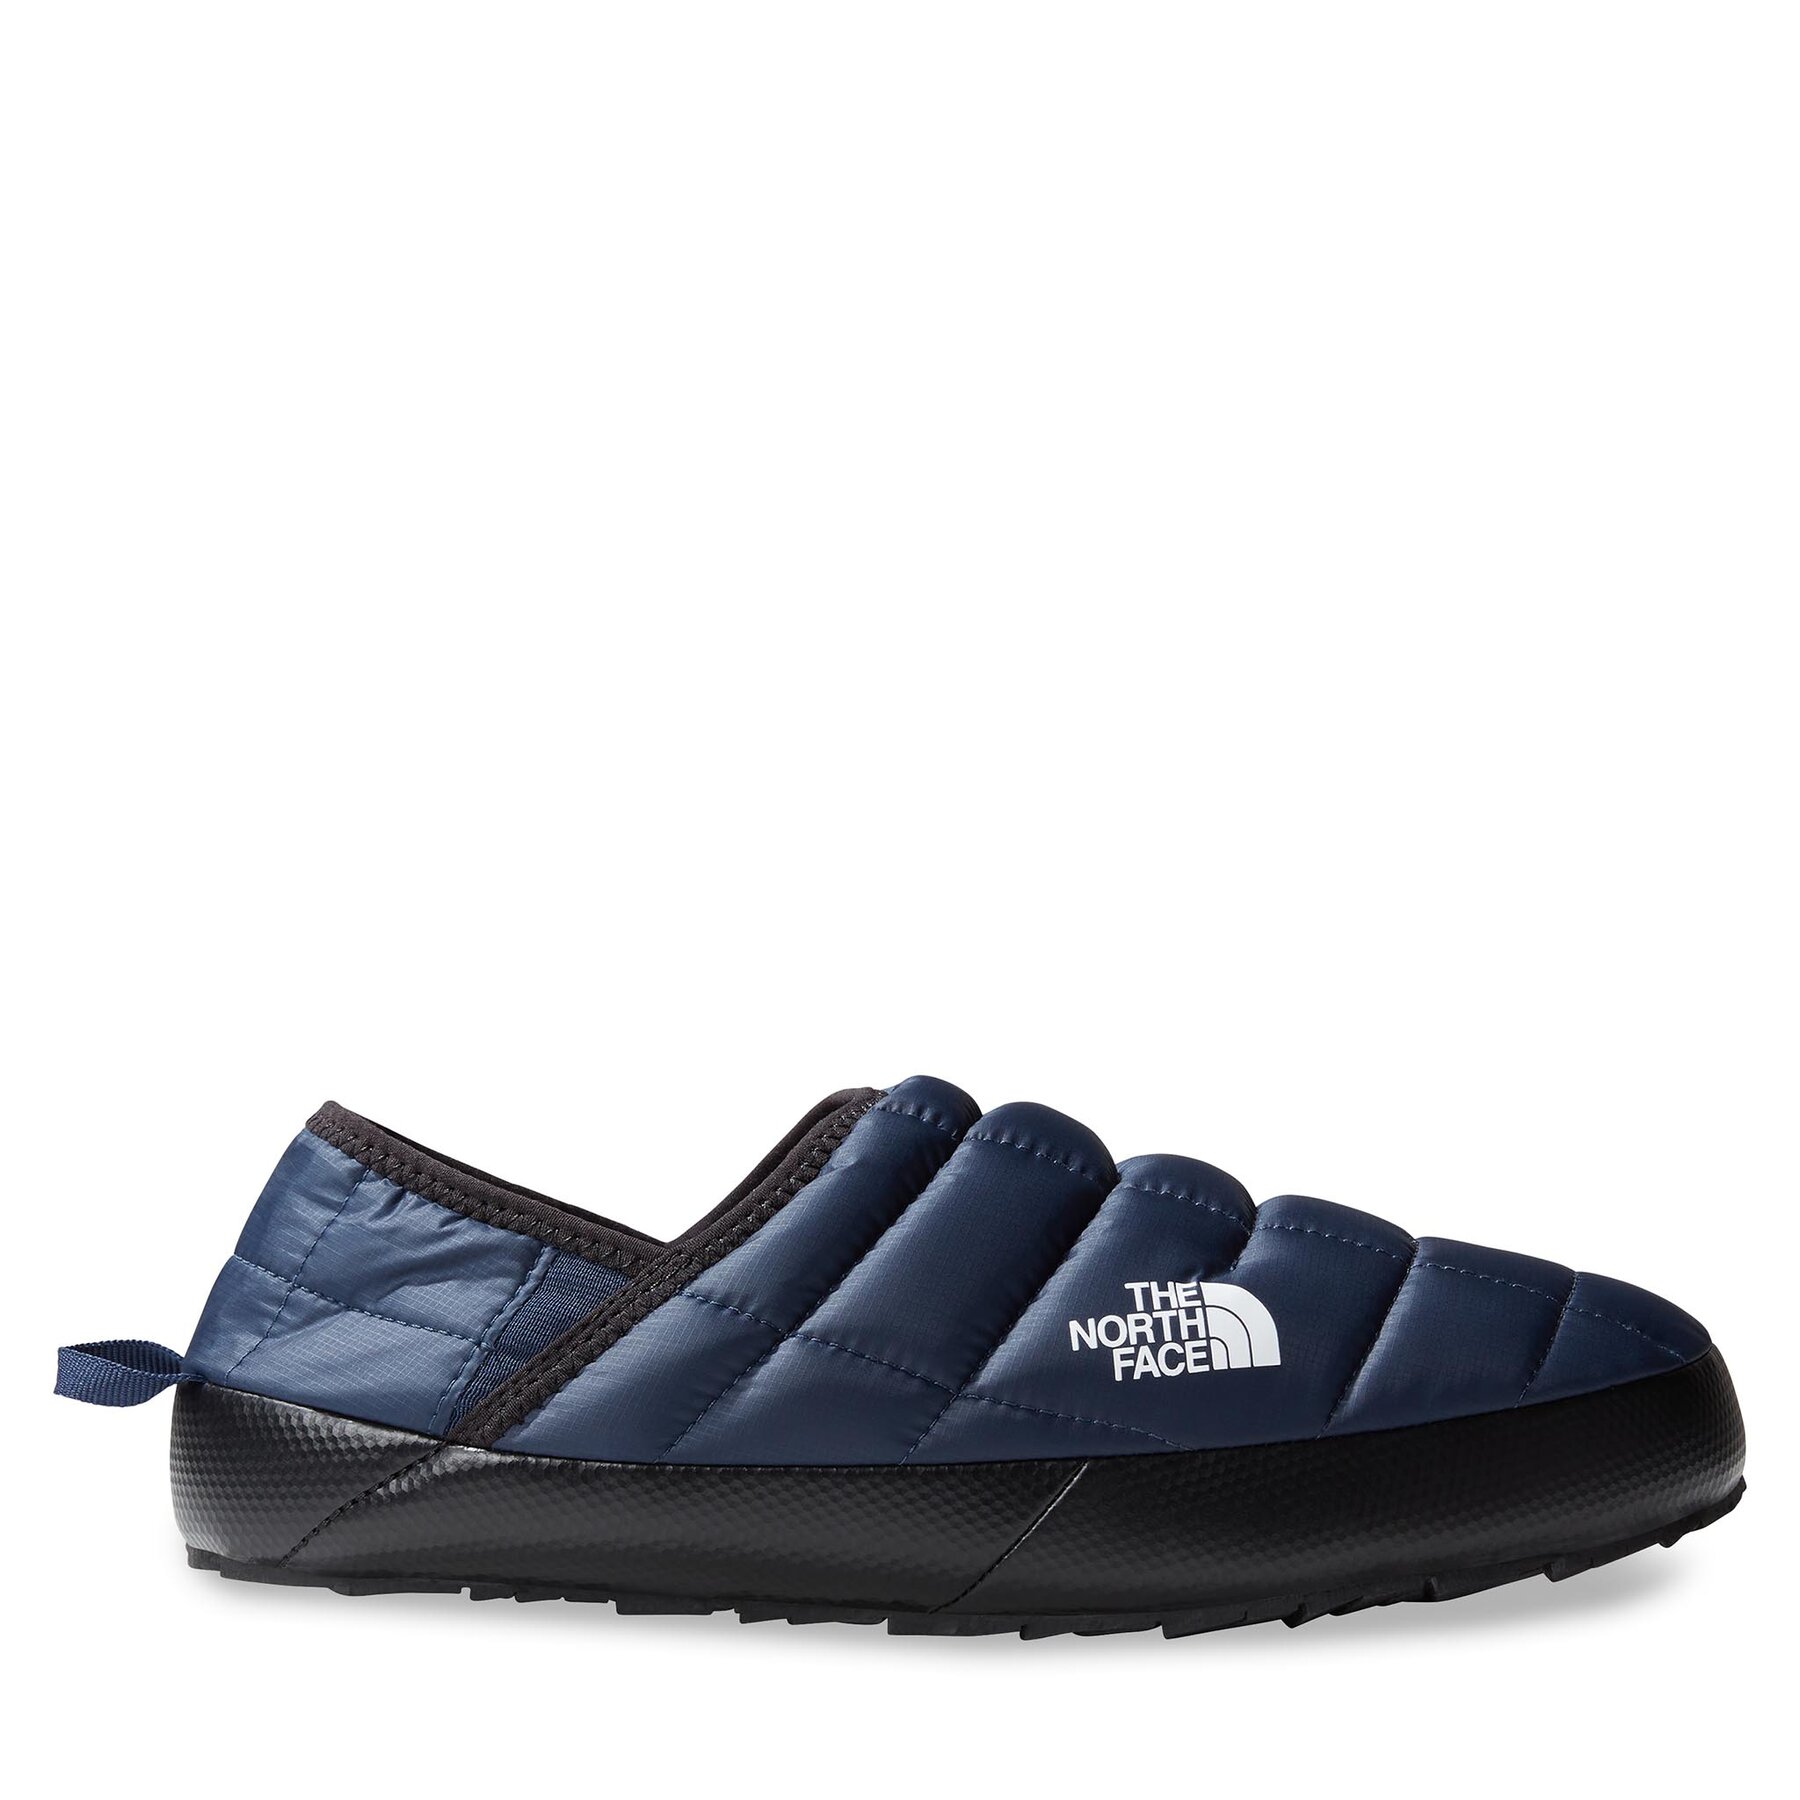 Hausschuhe The North Face M Thermoball Traction Mule VNF0A3UZNI851 Summit Navy/Tnf White von The North Face